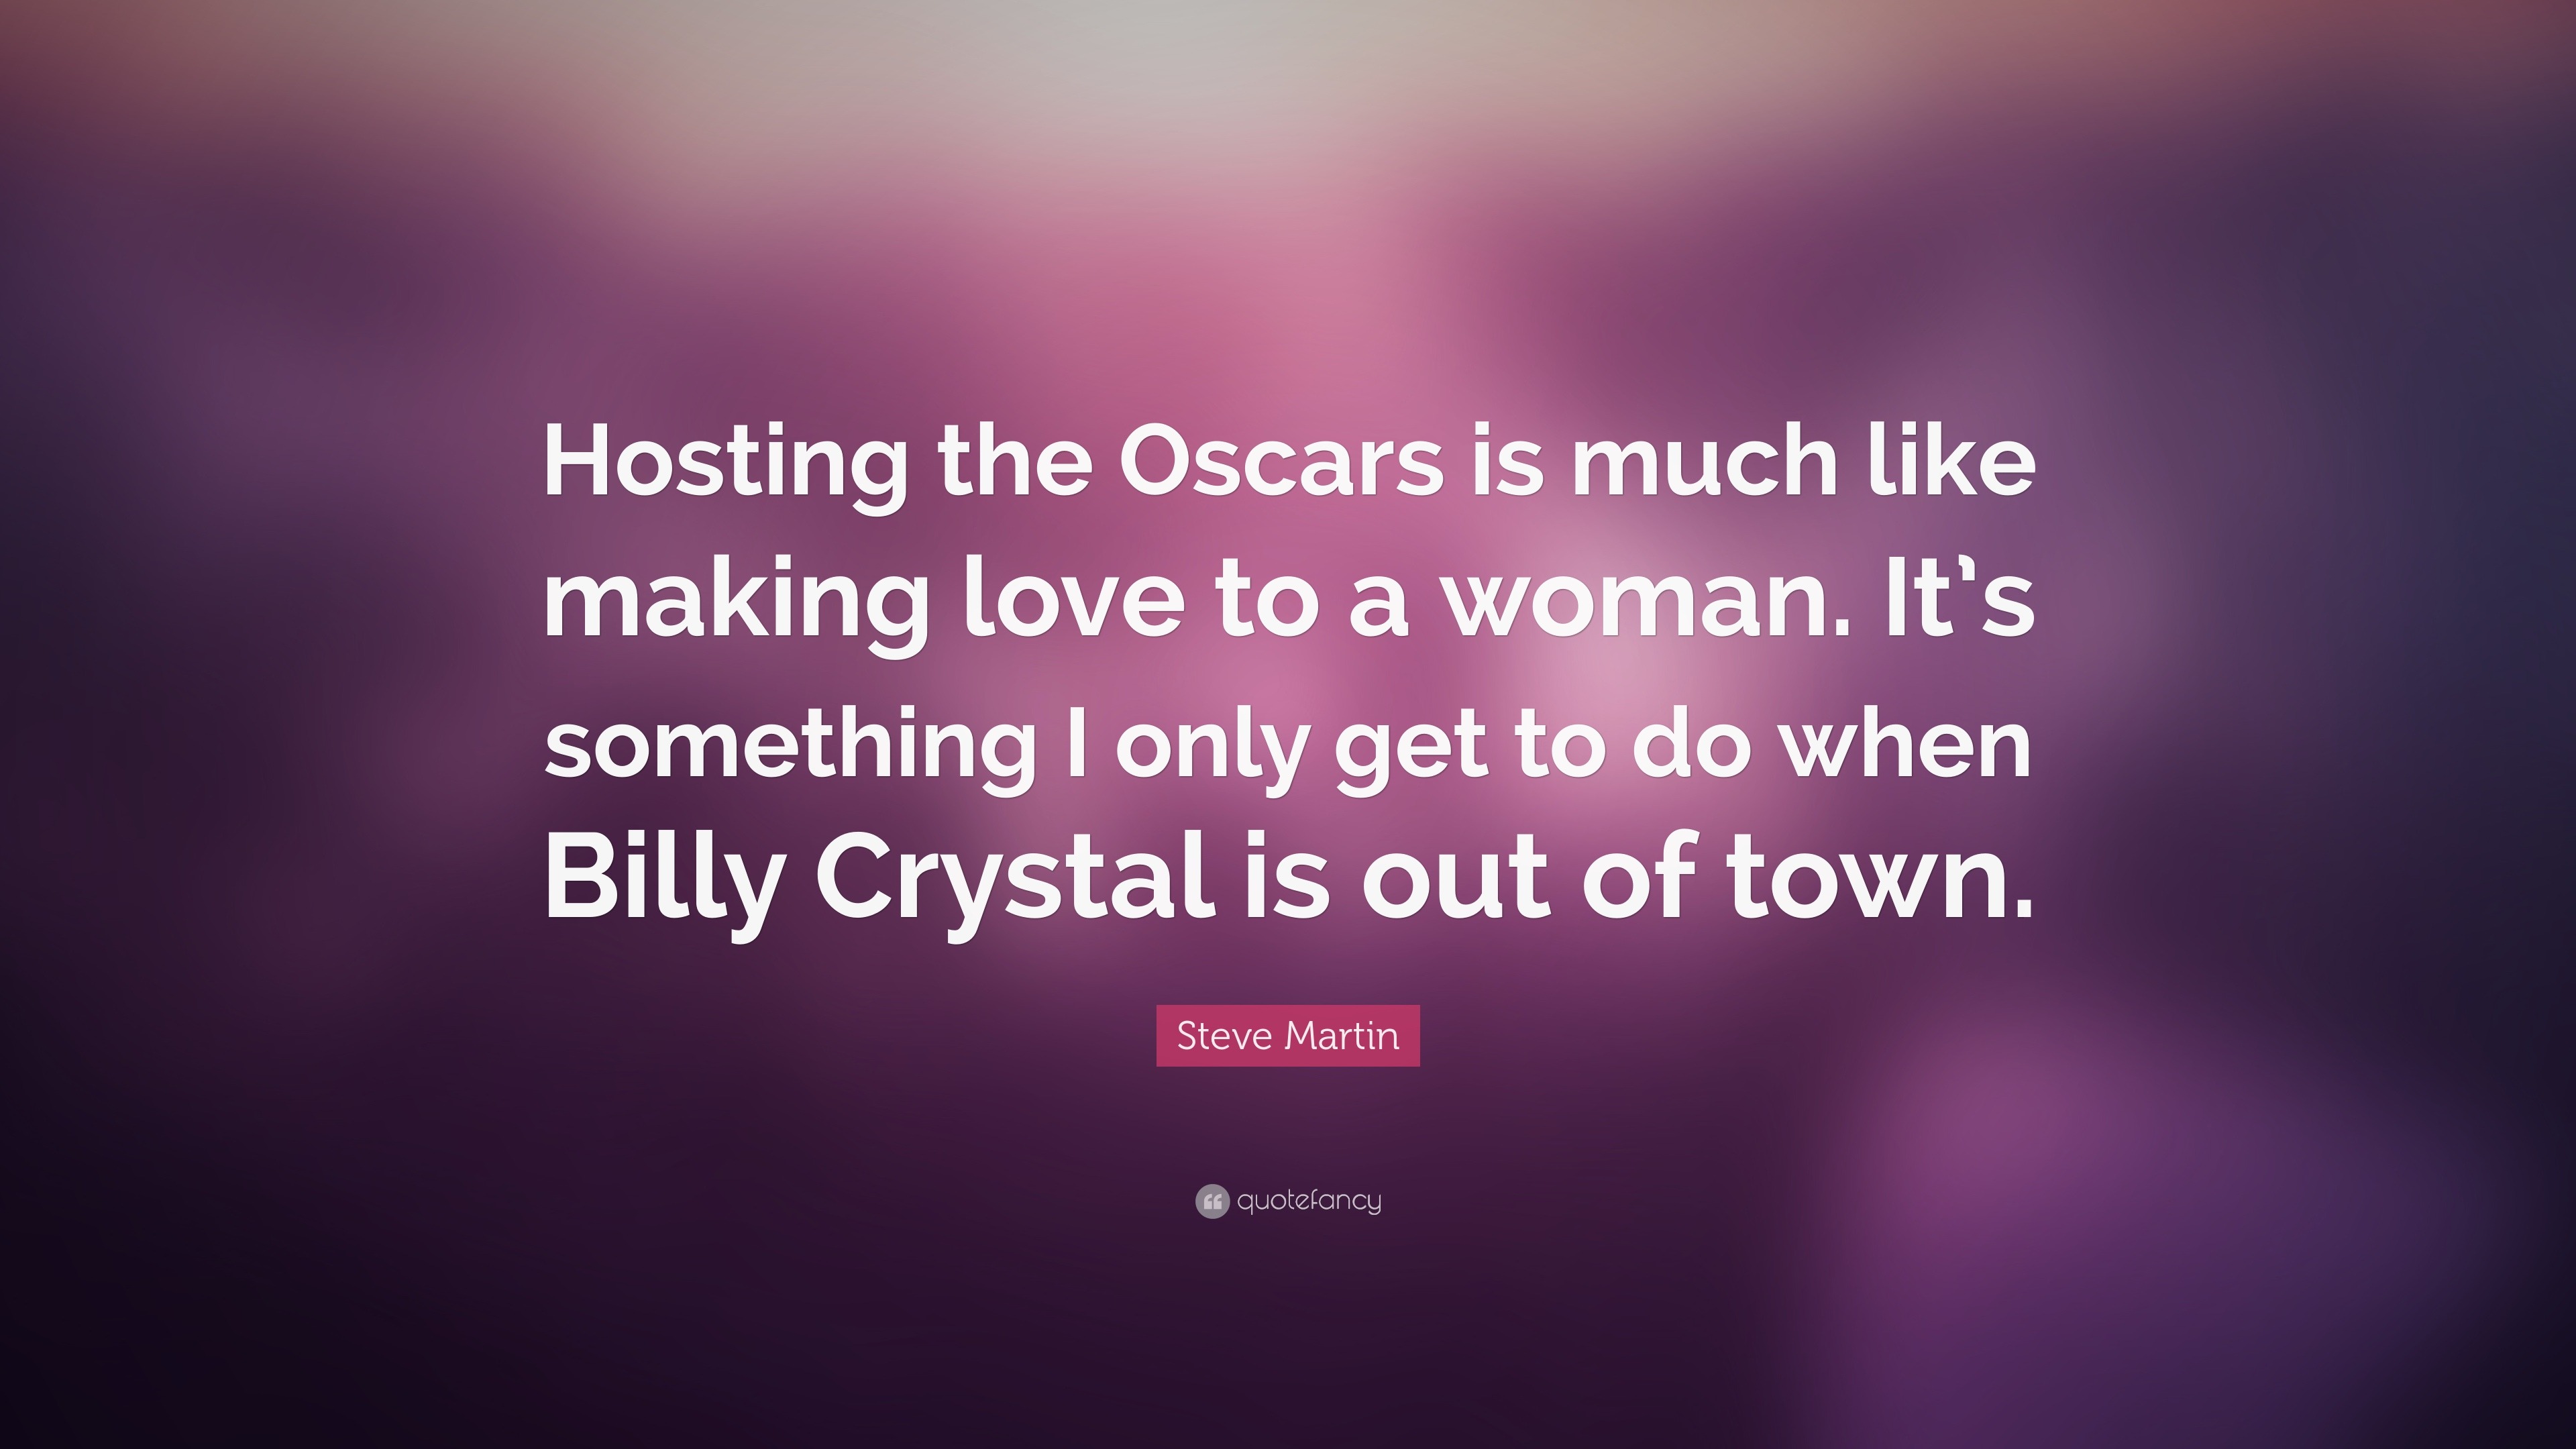 Steve Martin Quote “Hosting the Oscars is much like making love to a woman